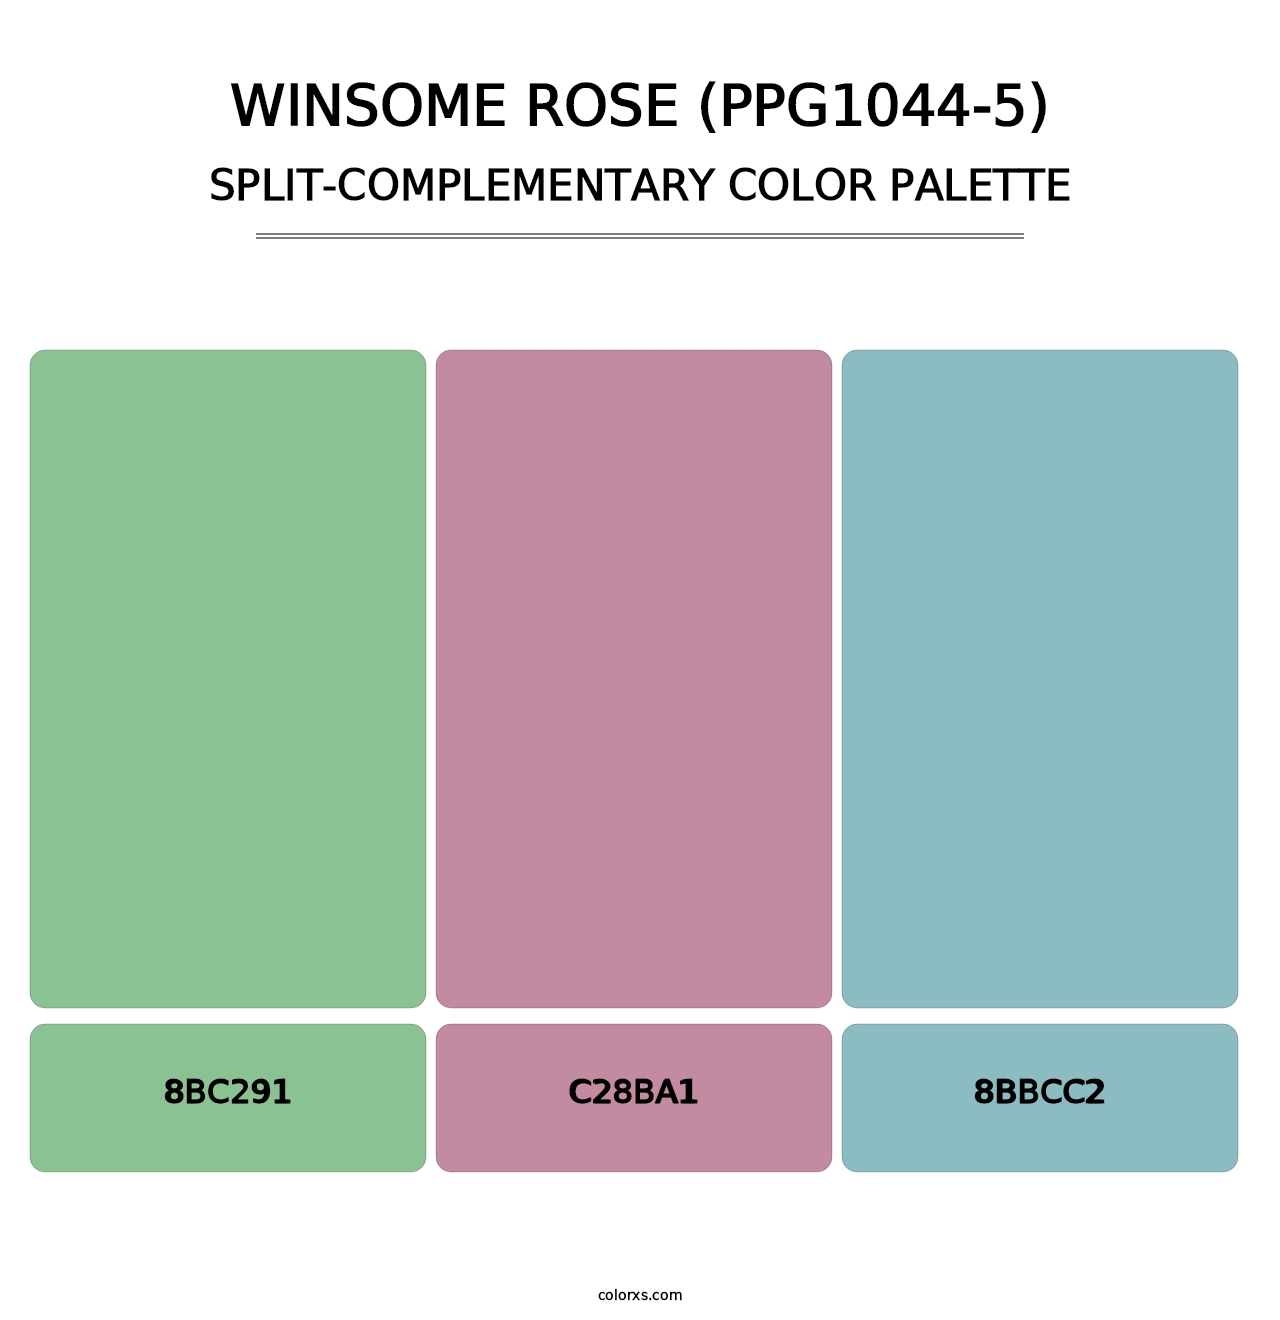 Winsome Rose (PPG1044-5) - Split-Complementary Color Palette